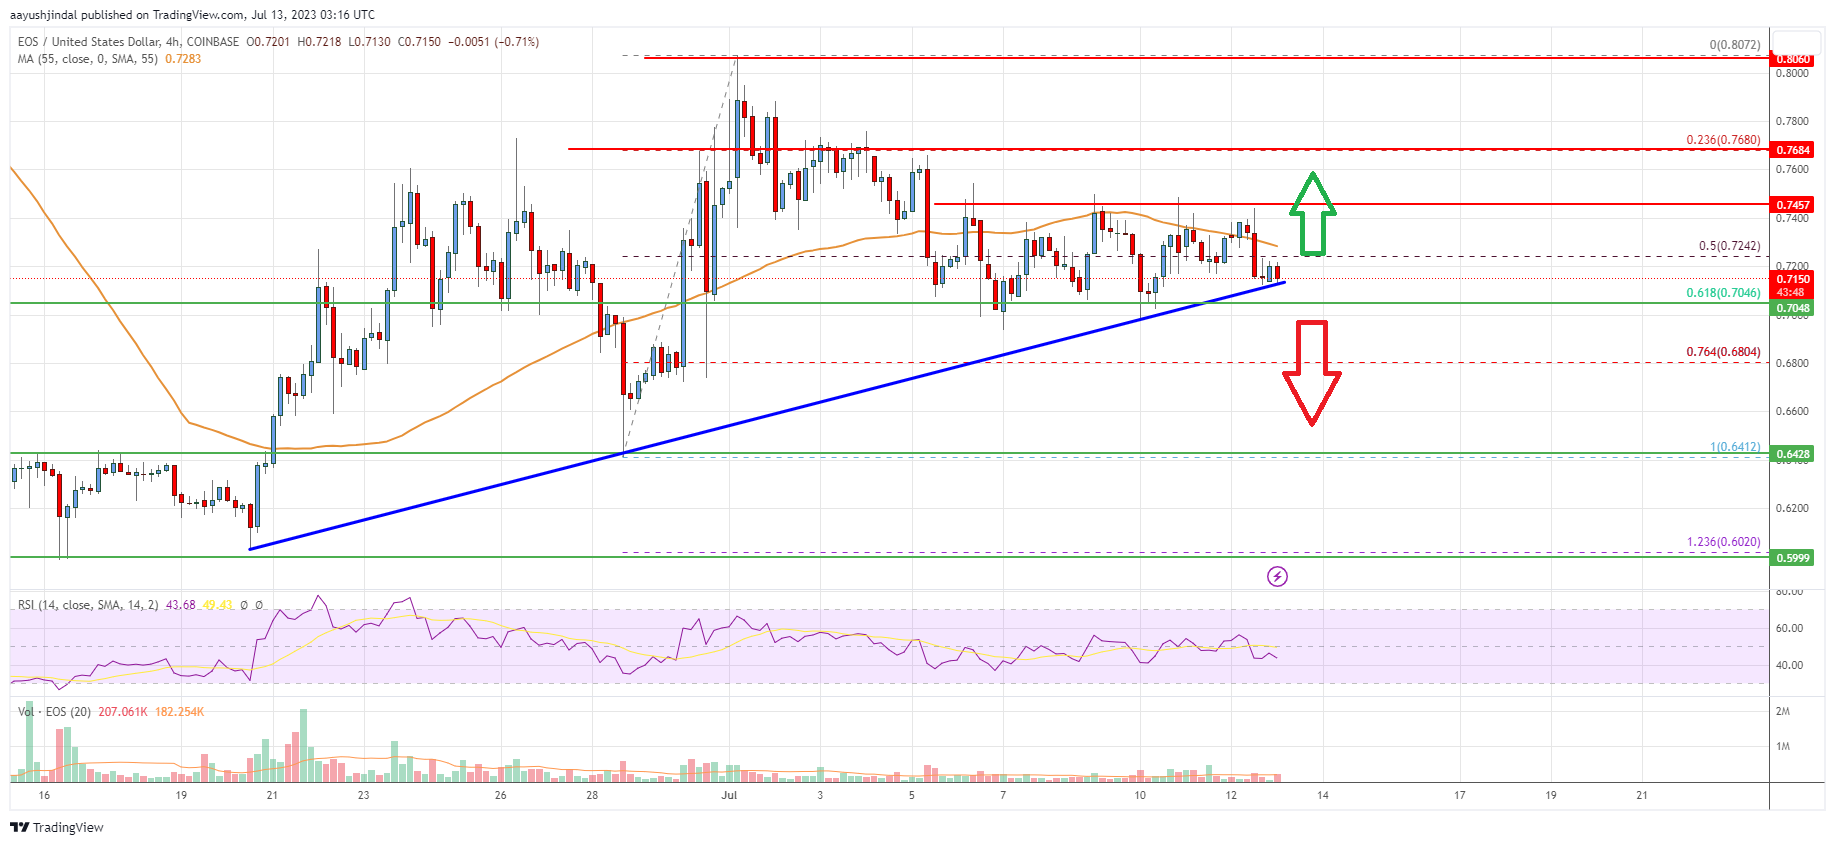 EOS Price Analysis: Key Uptrend Support Intact at $0.70